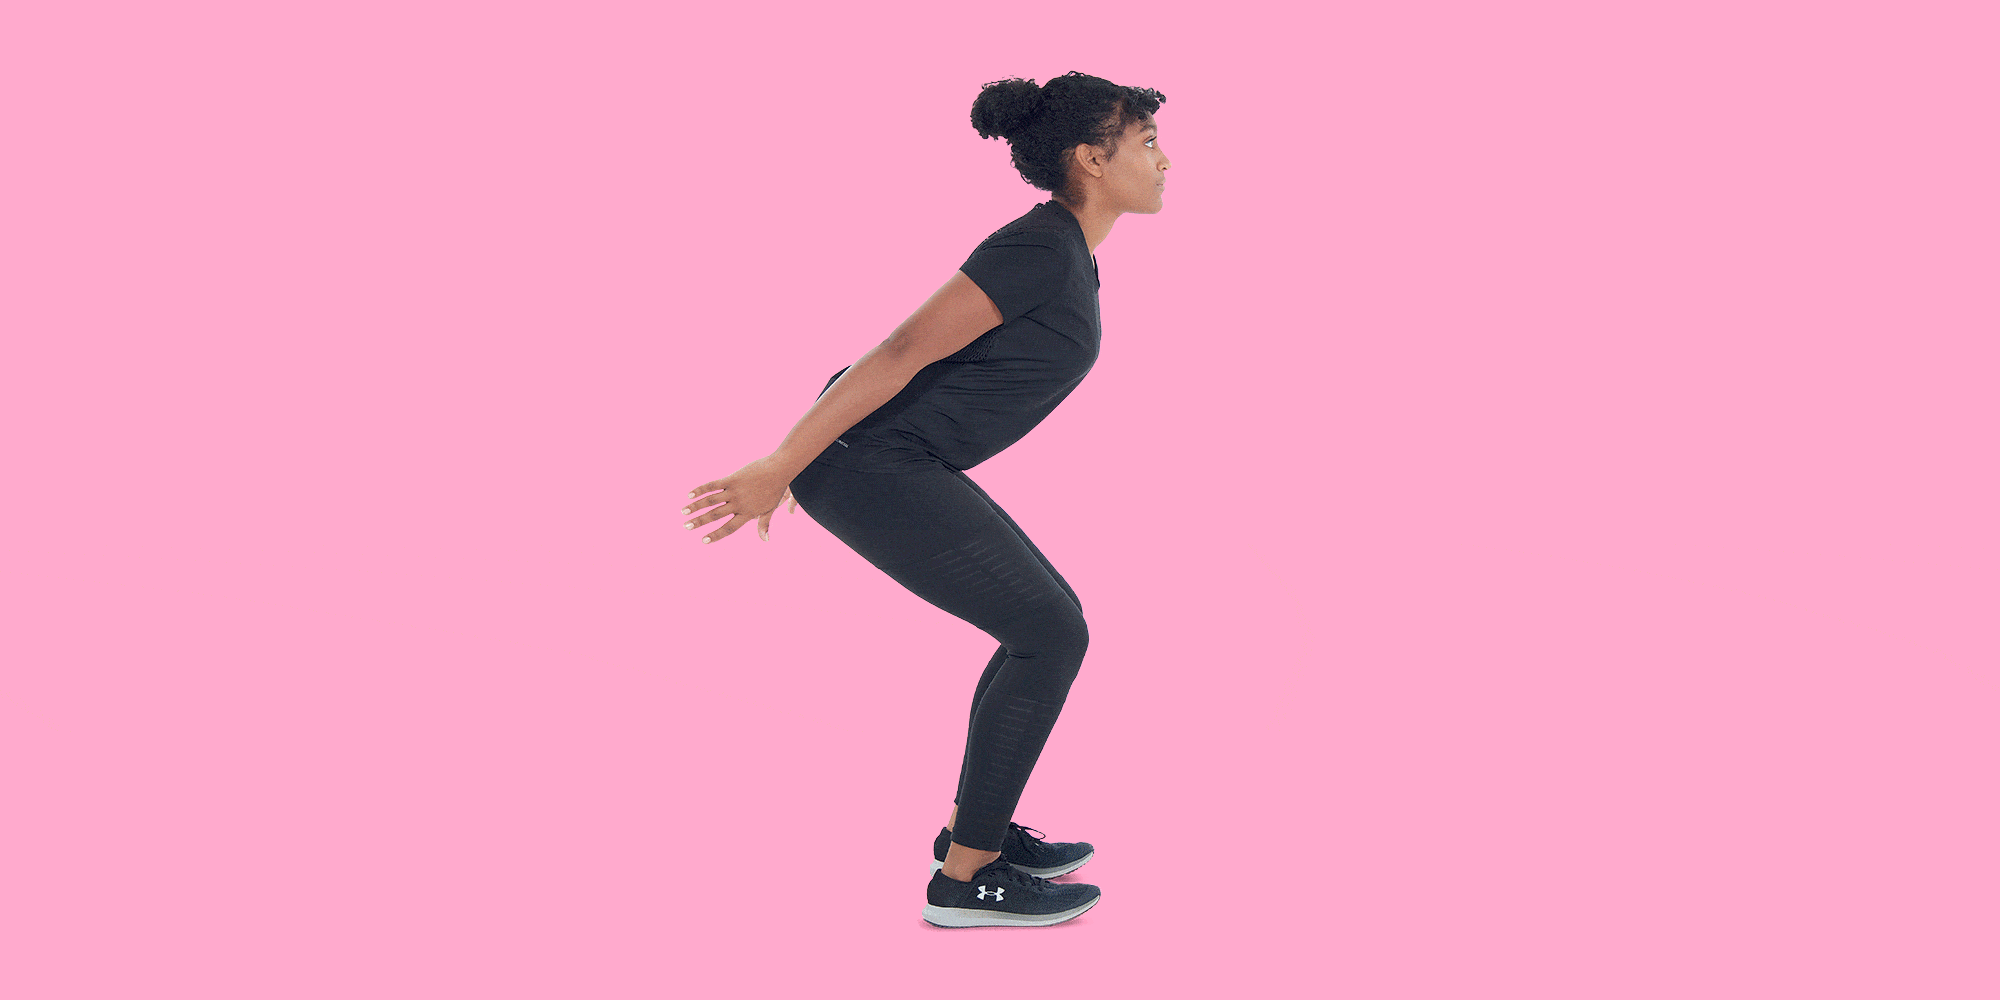 burpee tuck jumps step by step